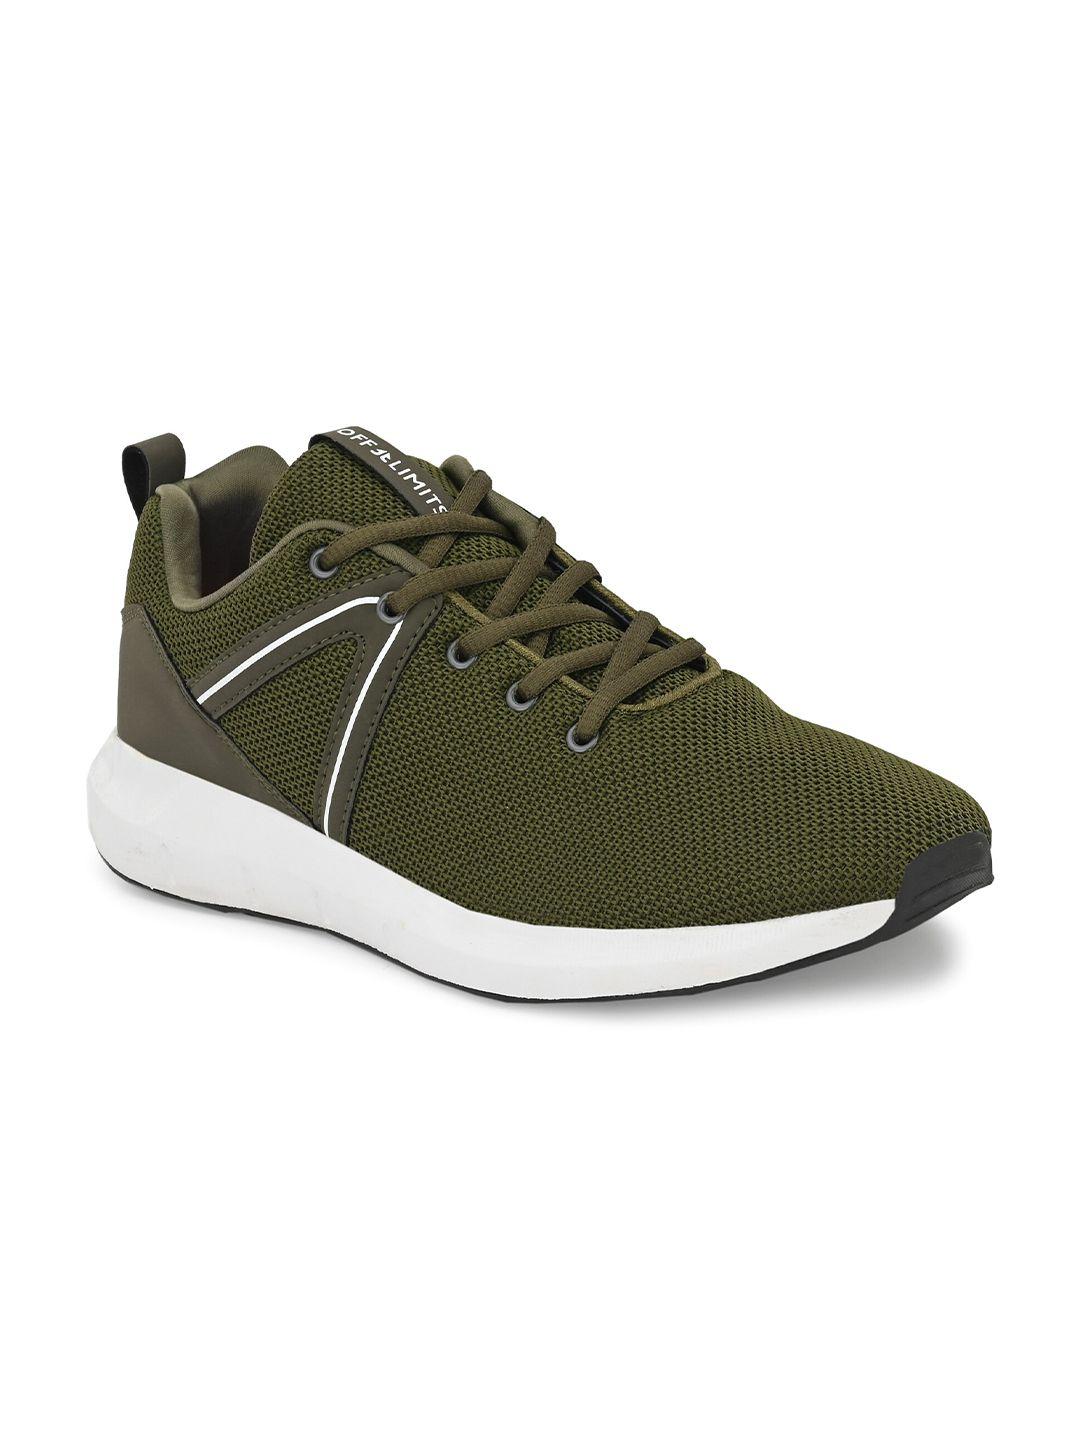 off-limits-men-olive-green-mesh-running-non-marking-shoes